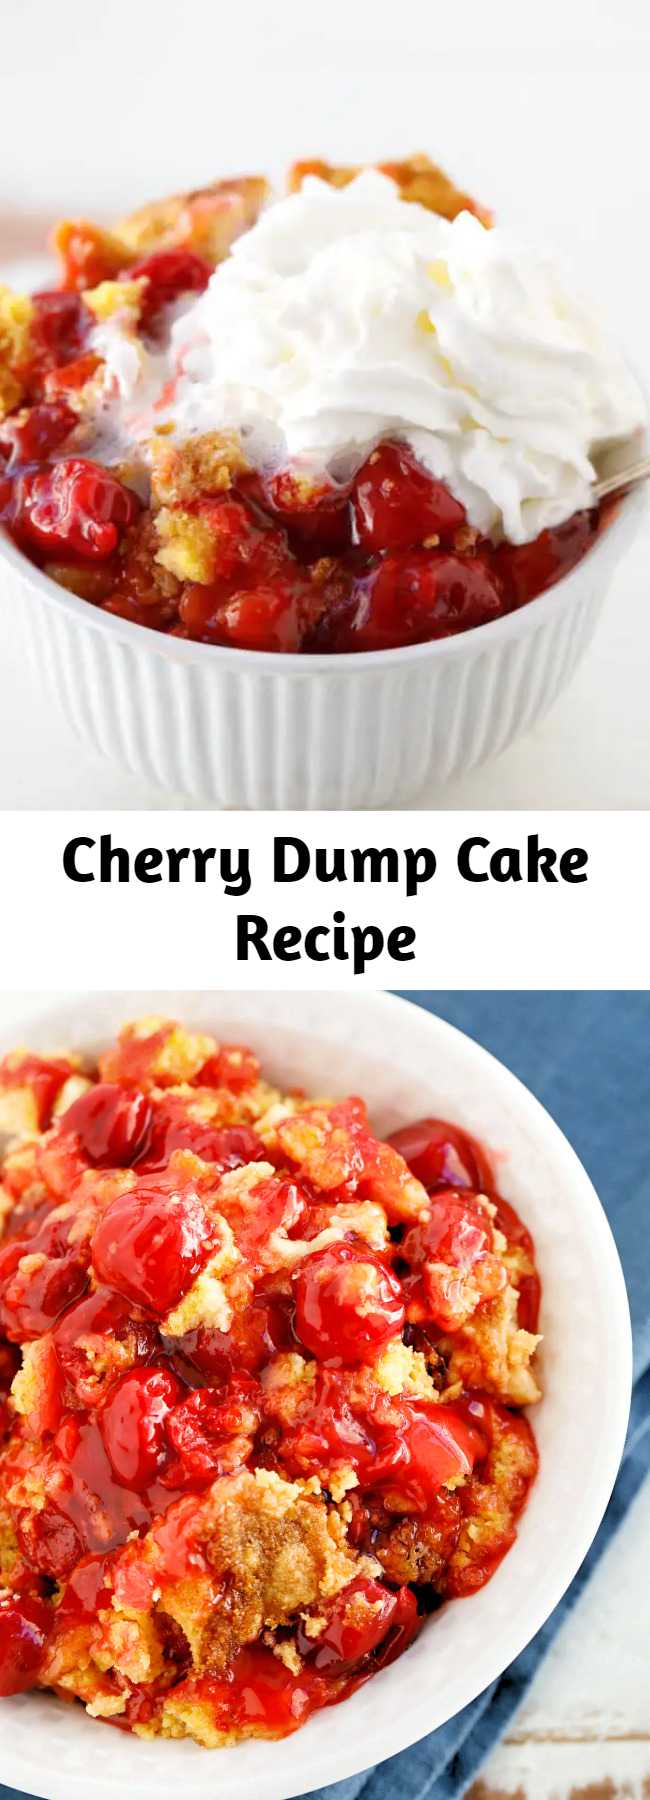 This sweet and delicious cherry dump cake recipe is the perfect simple dessert. Don't forget the scoop of ice cream or whipped cream on top! This is such a wonderful and easy dump cake recipe. I make it all the time! #Easy #Dessert #DumpCake #EasyRecipes